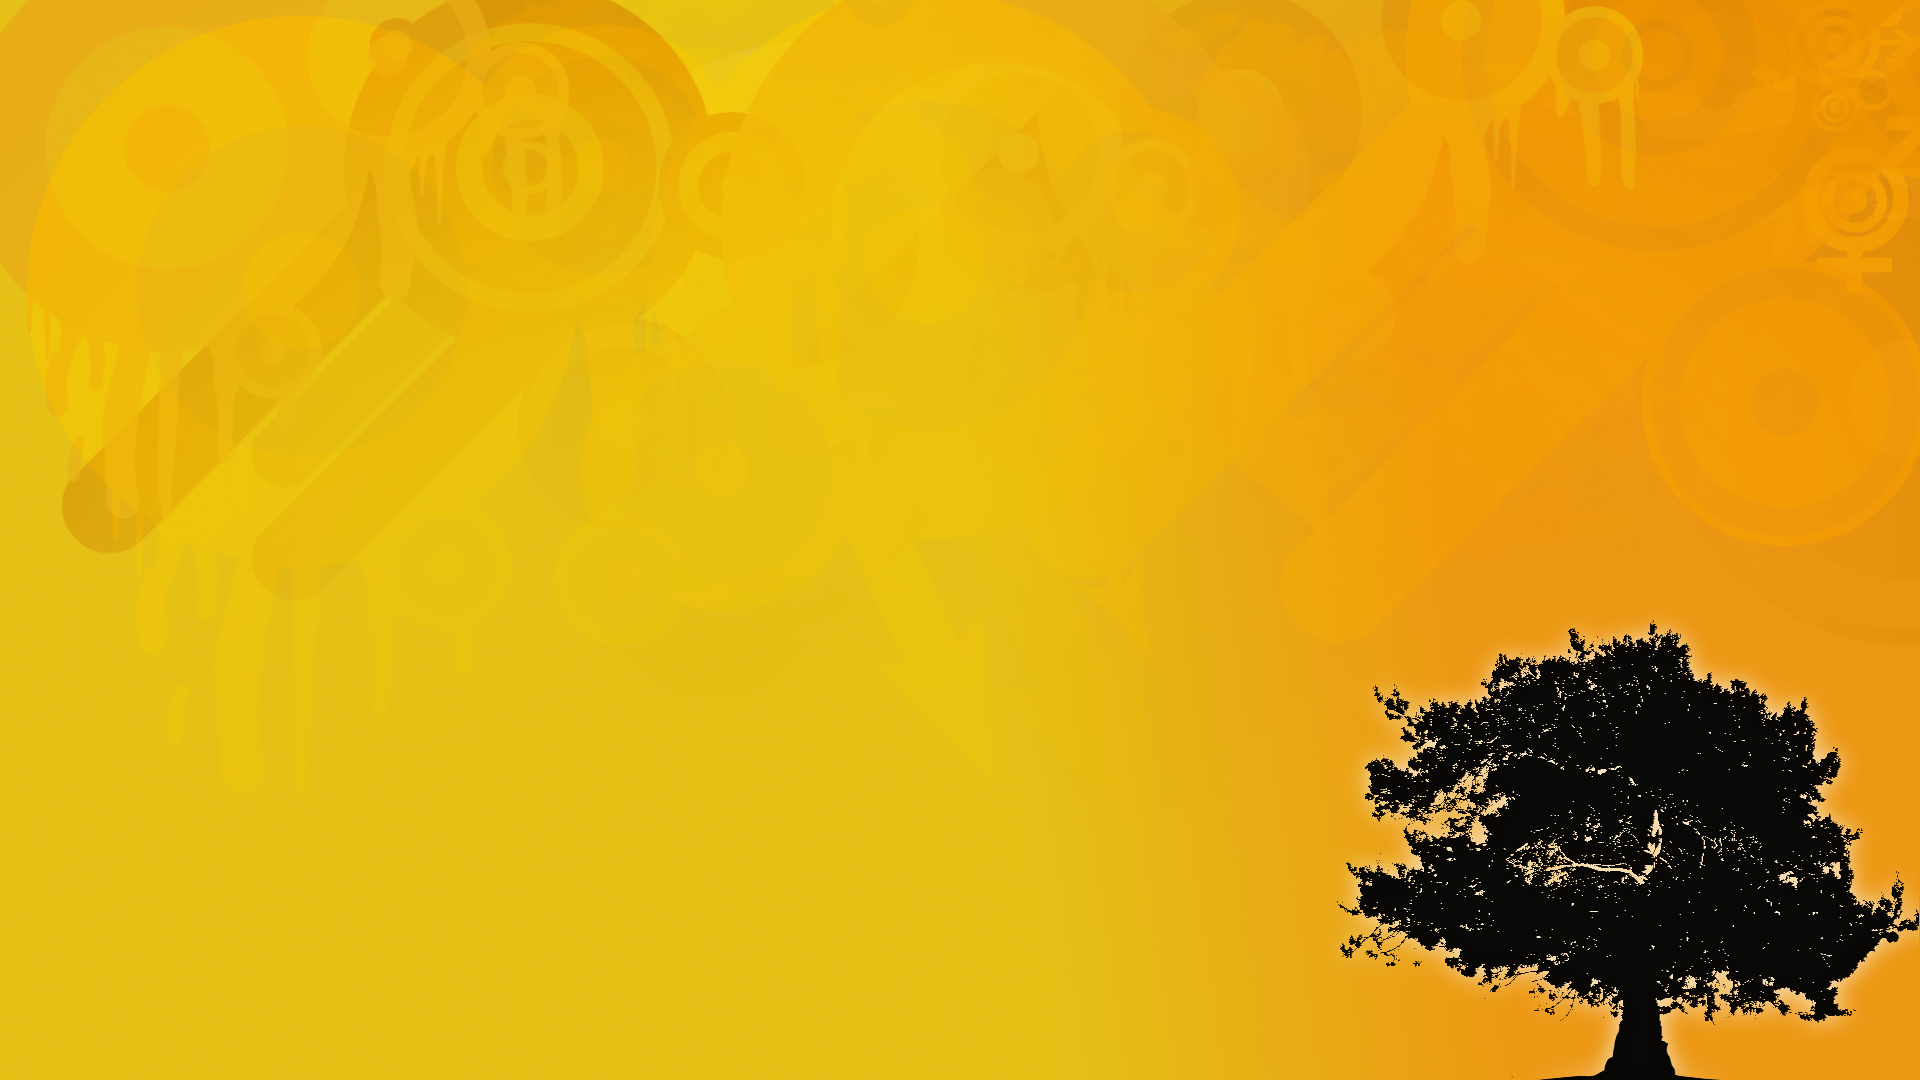 General 1920x1080 abstract vector art yellow background trees